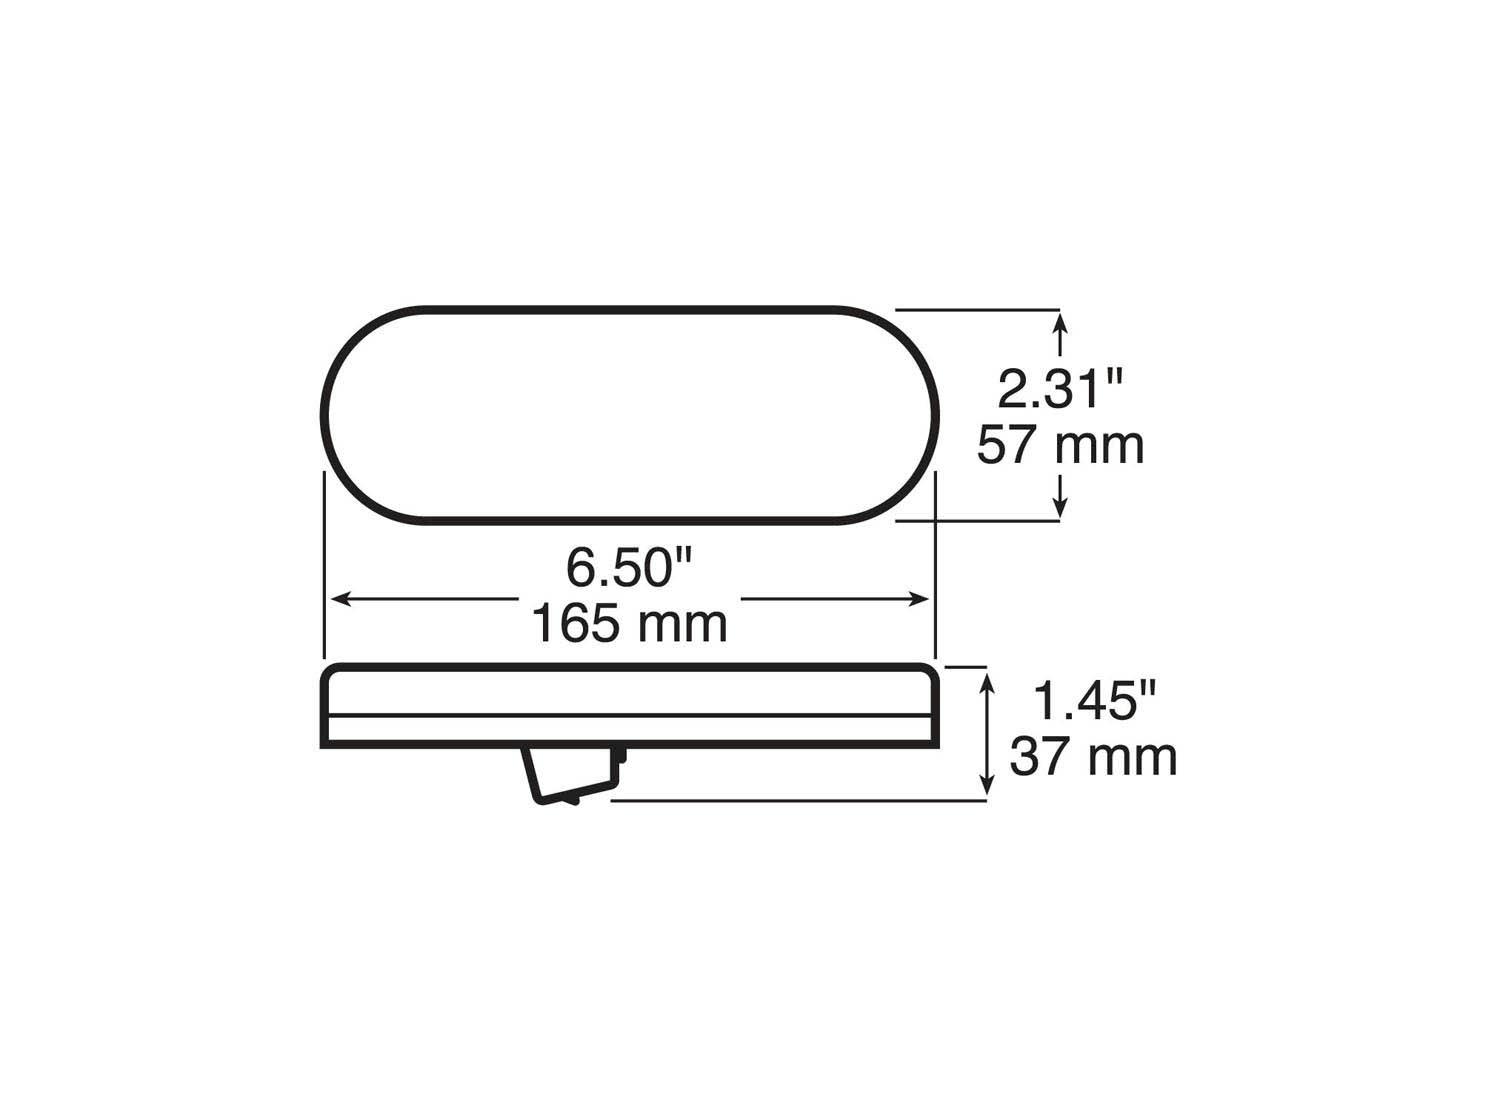 LED Stop/Turn/Tail, Oval, AMP, Grommet-Mount, 6.50"X2.25" (Pack of 50) - 820-3_line_dual_2view-BX5_6ed4023f-f208-4c83-a502-f16bfe408650